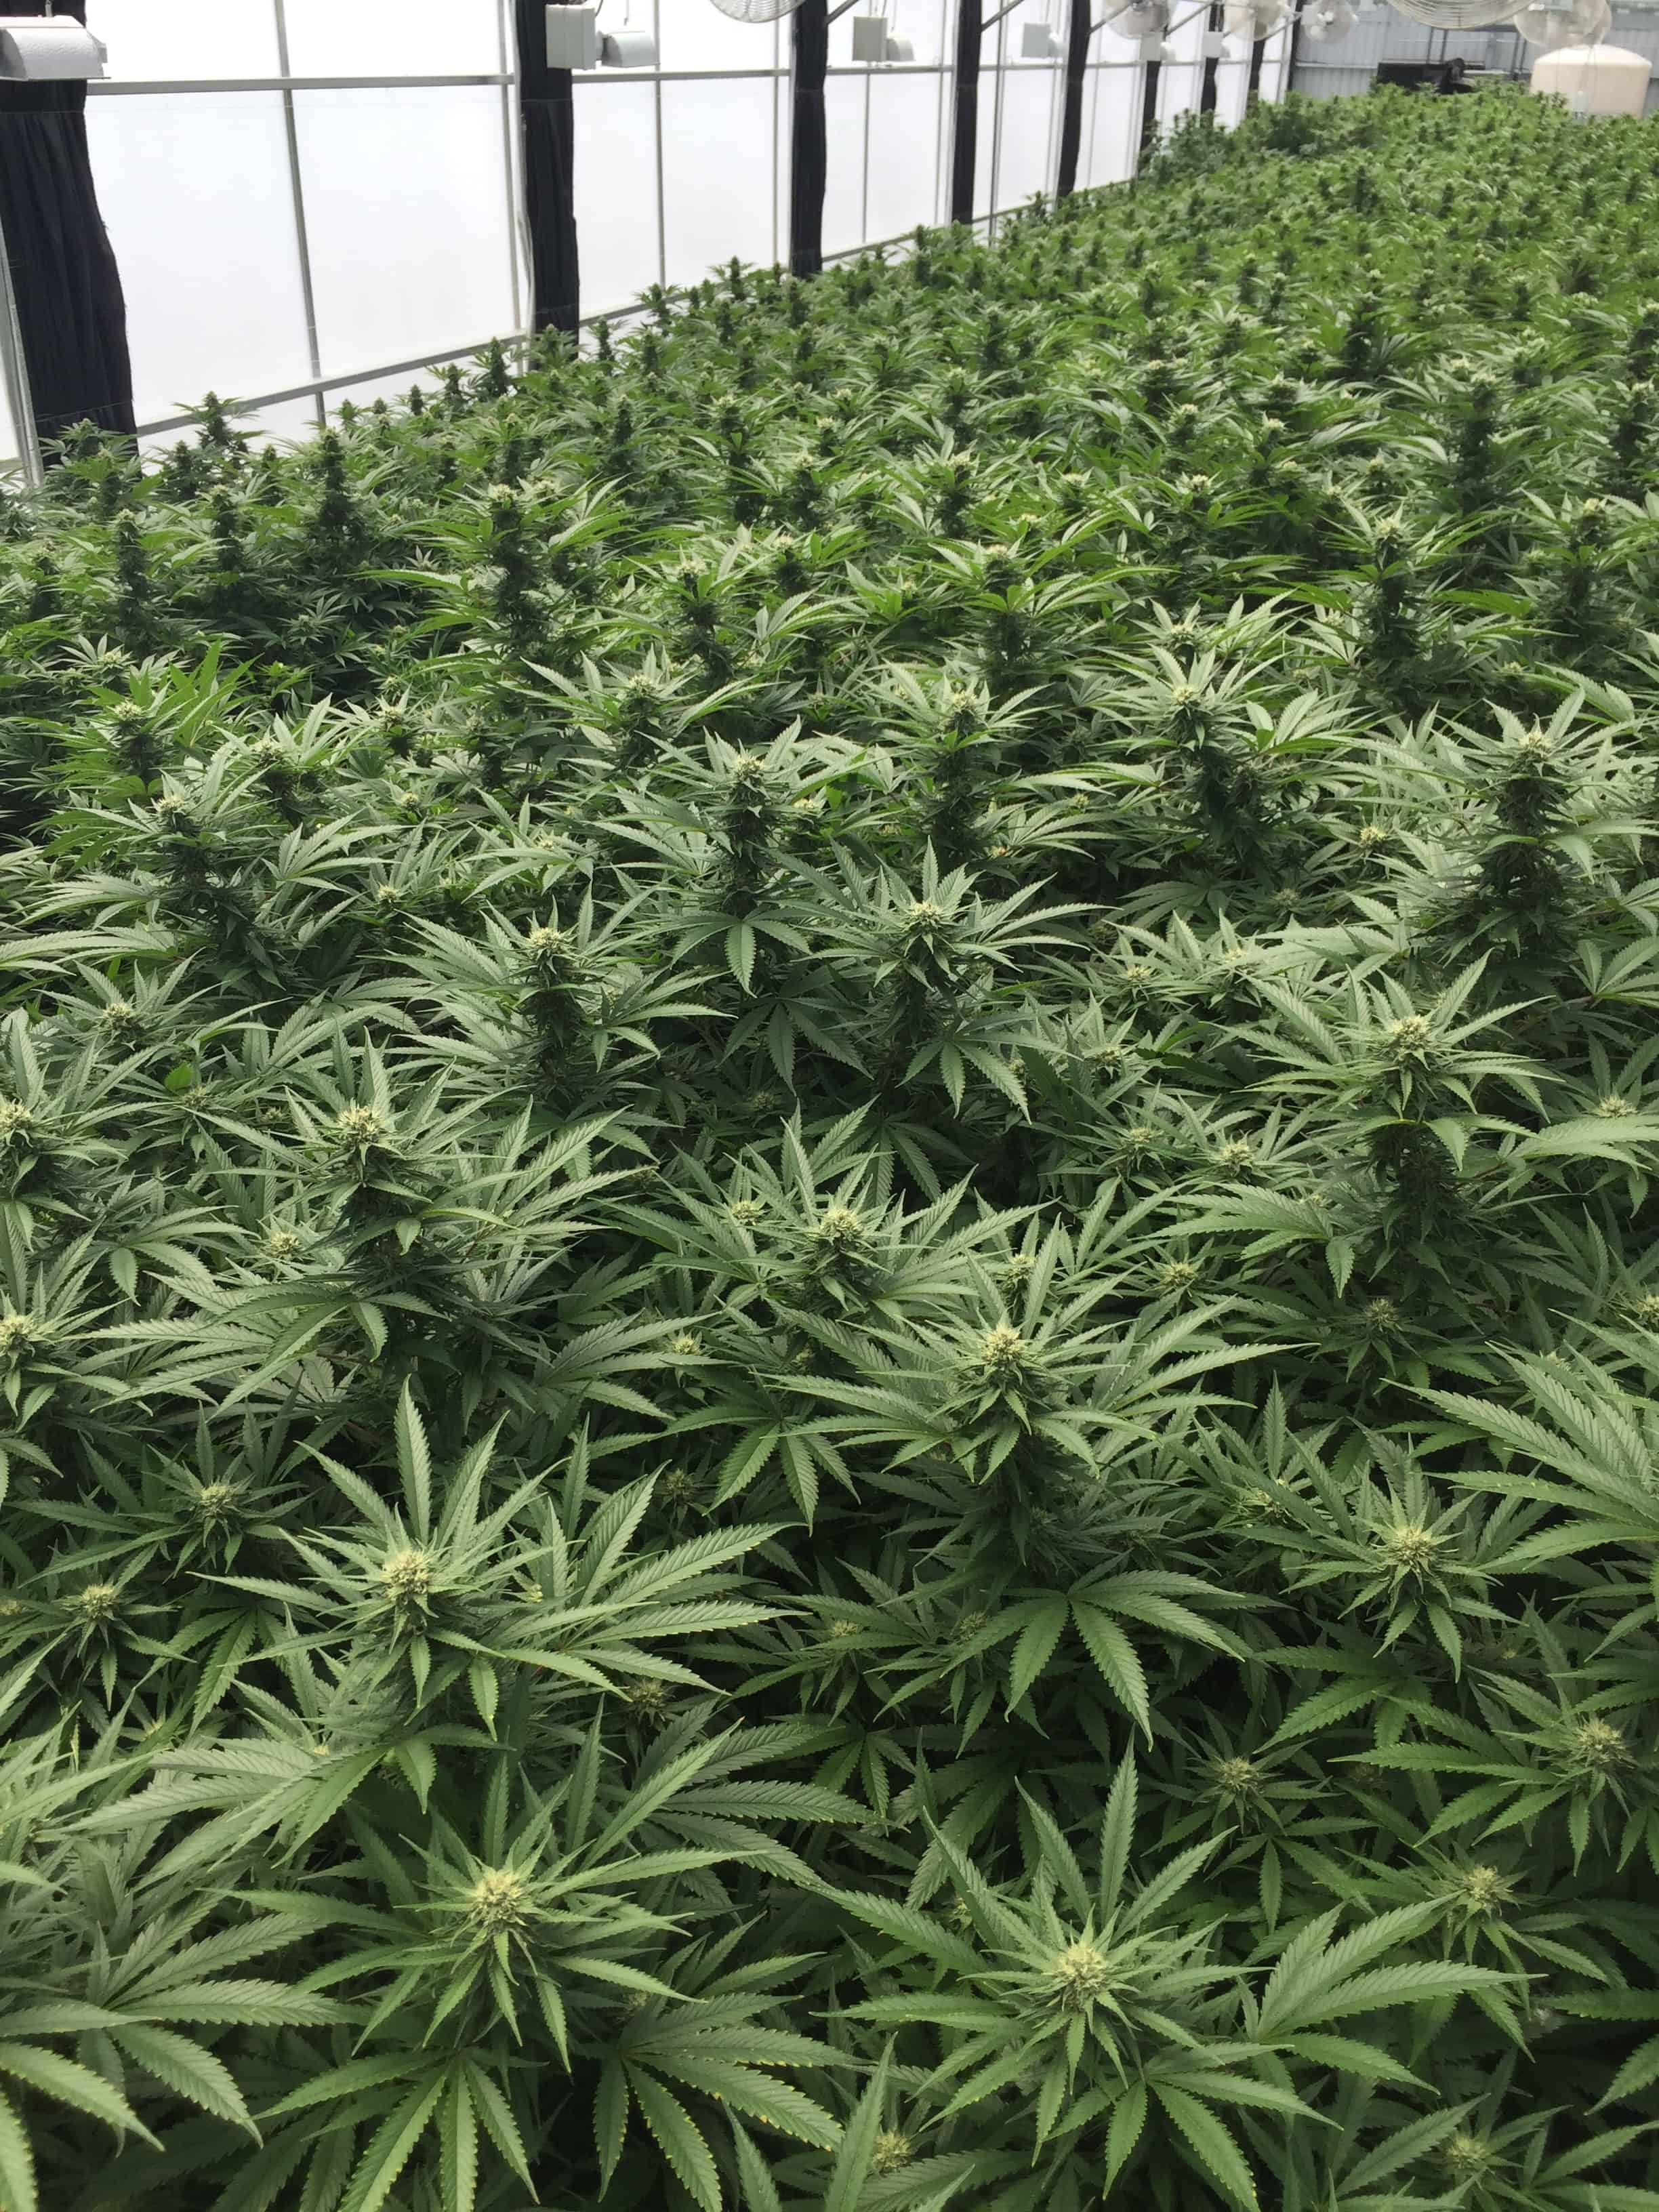 water soluble nutrients help make strong cannabis crops